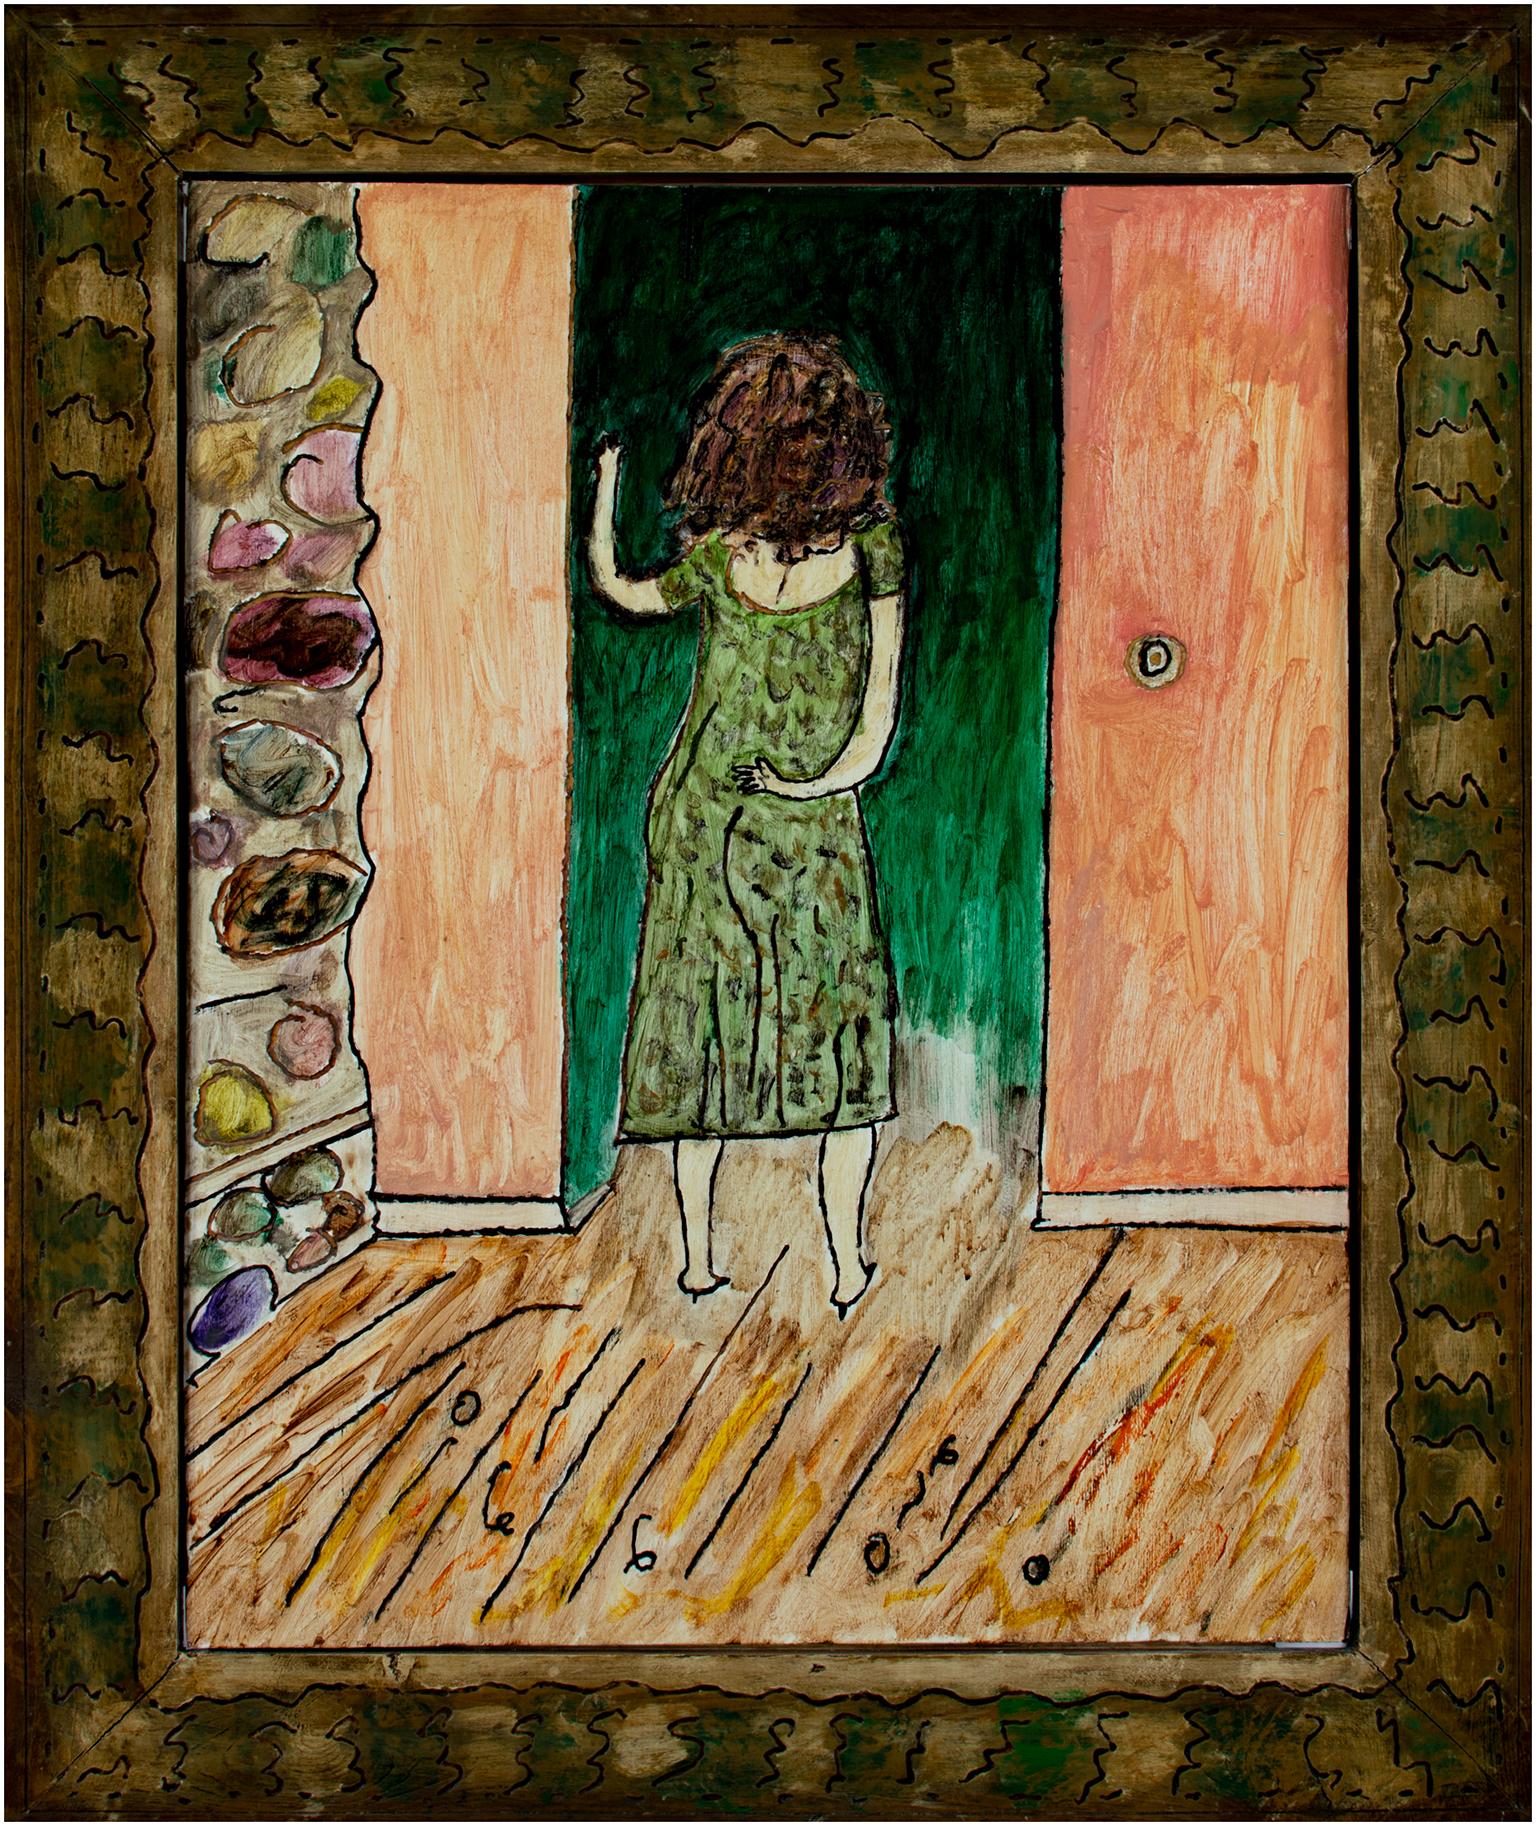 "Home From Work" is an original oil painting on wood by Robert Richter. The artist signed the piece on the back. This artwork features a woman in a green patterned dress walking through a doorway. The walls are a light peach-orange color behind her